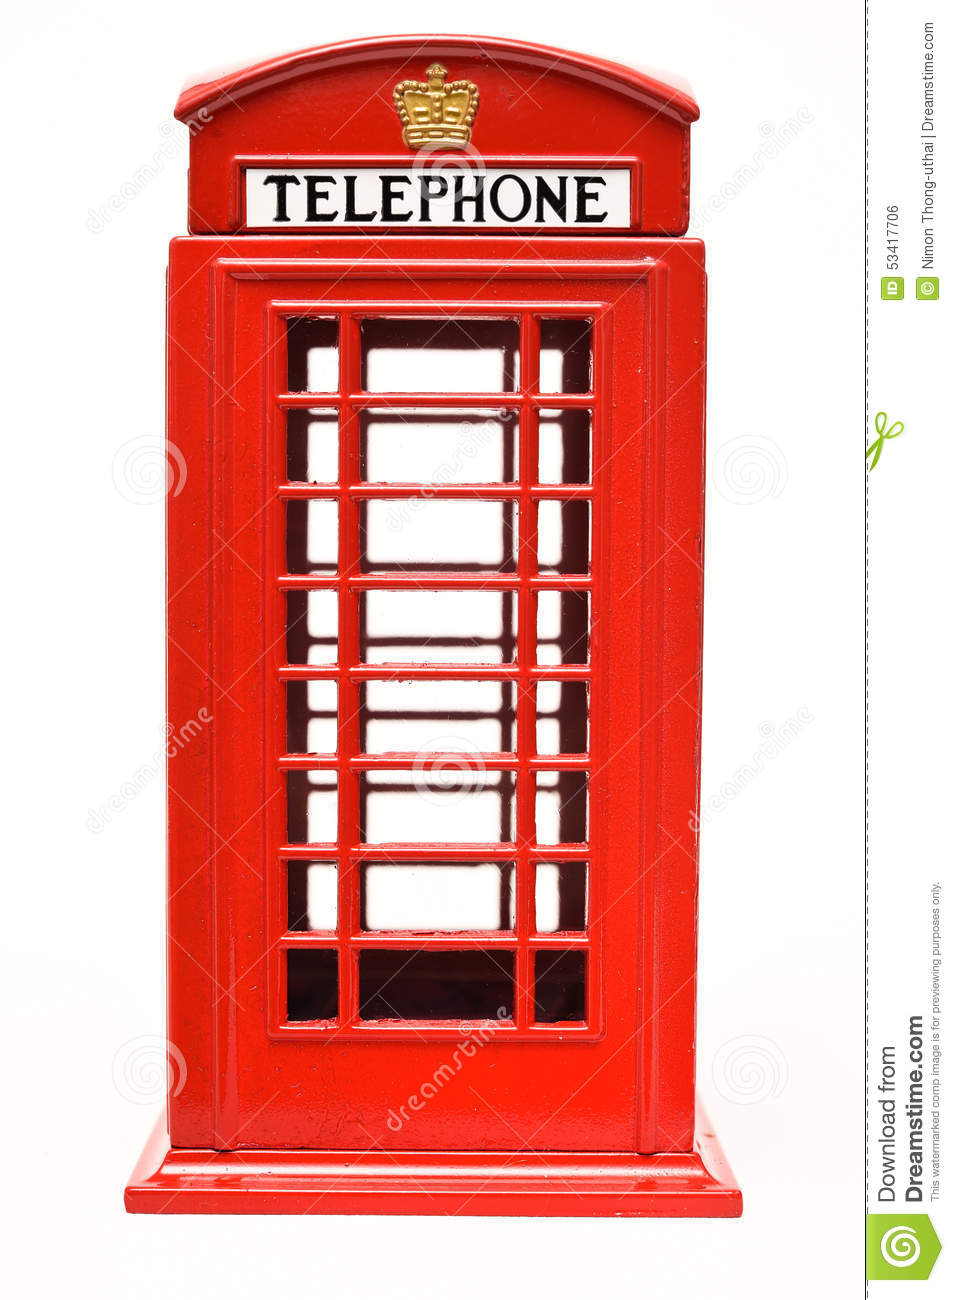 phone booth clipart - photo #23